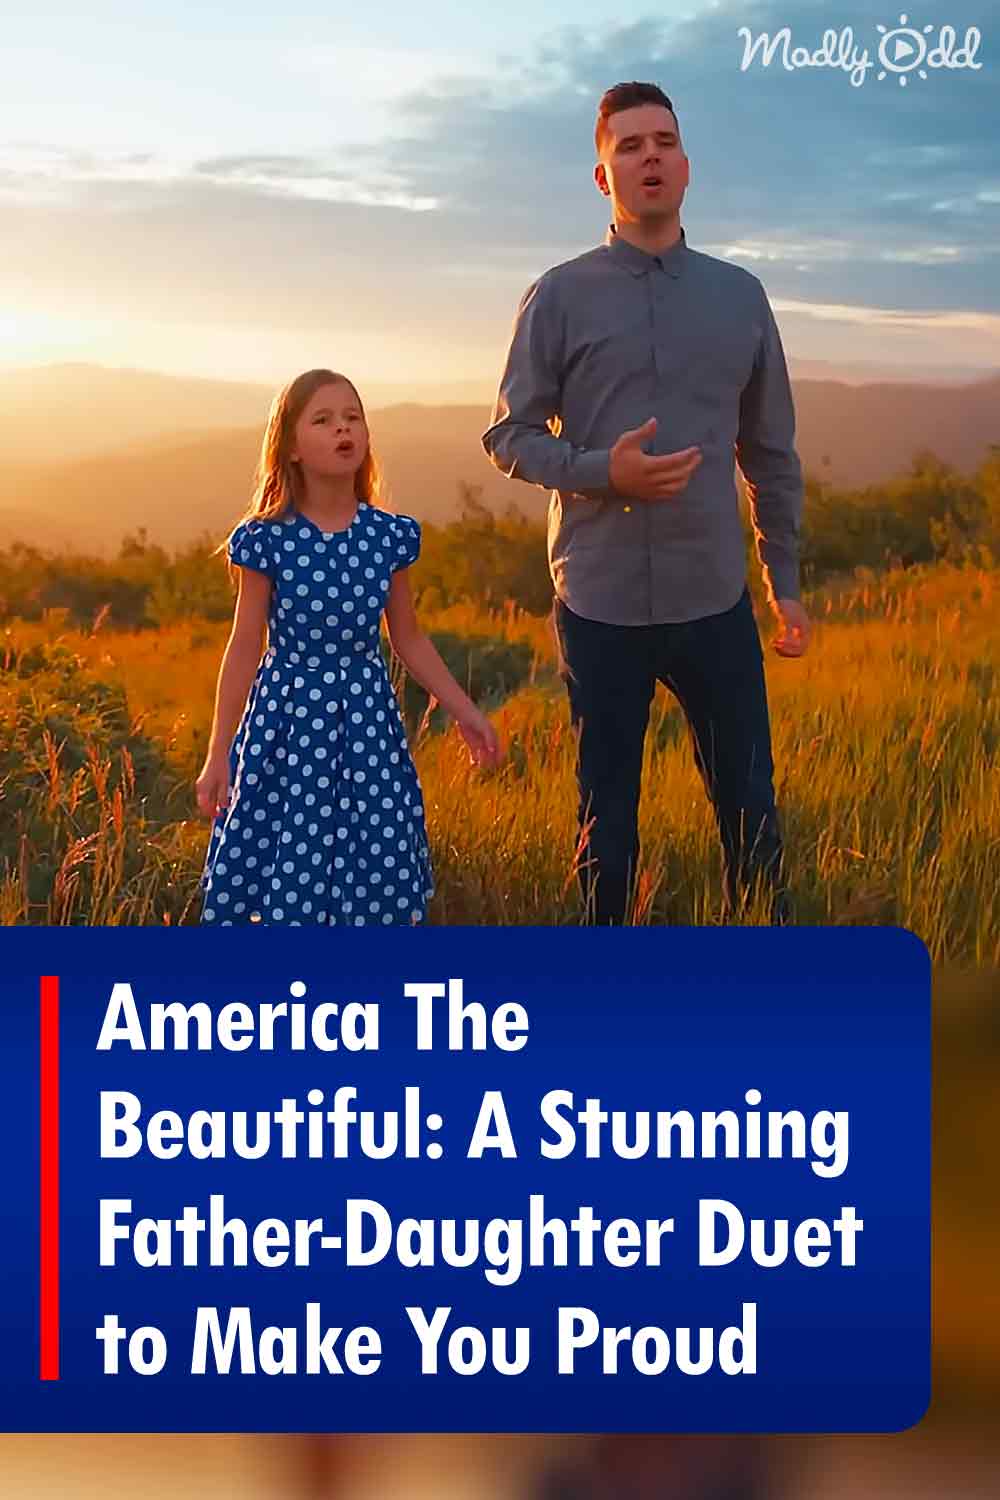 America The Beautiful: A Stunning Father-Daughter Duet to Make You Proud